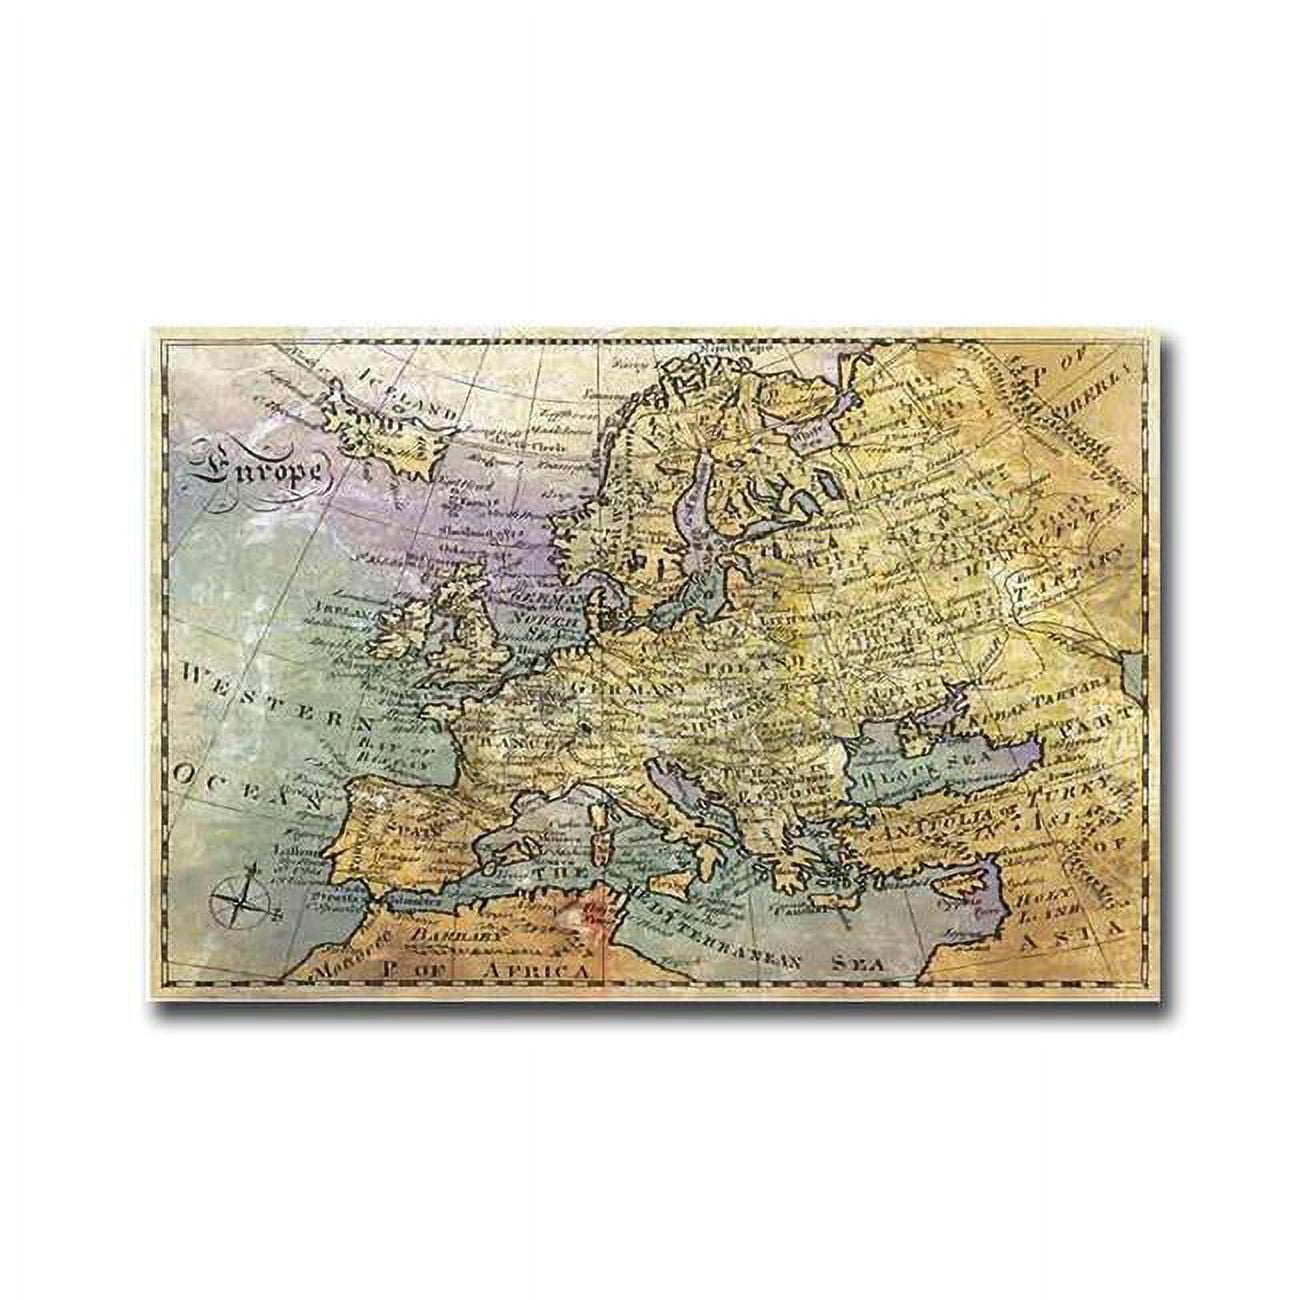 1624e583eg The Old World By John Butler Premium Gallery-wrapped Canvas Giclee Map Art - 16 X 24 X 1.5 In.